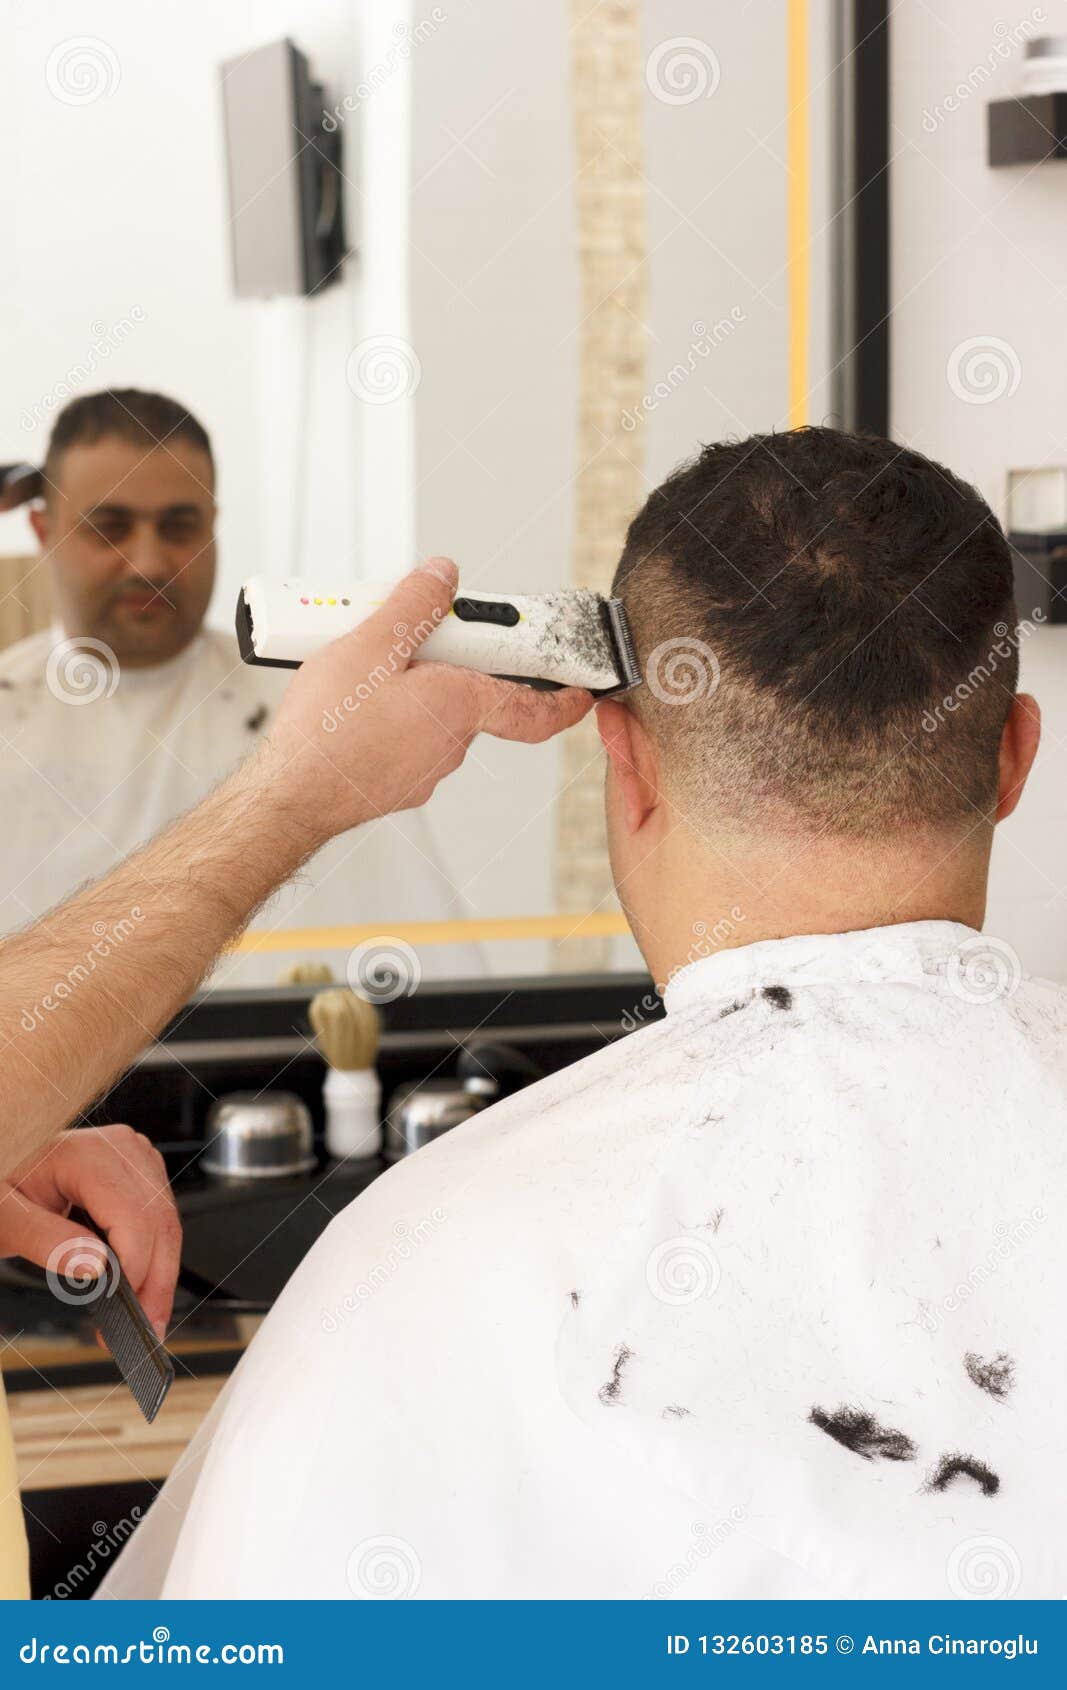 Back View Of Man Getting Short Hair Trimming At Barber Shop With